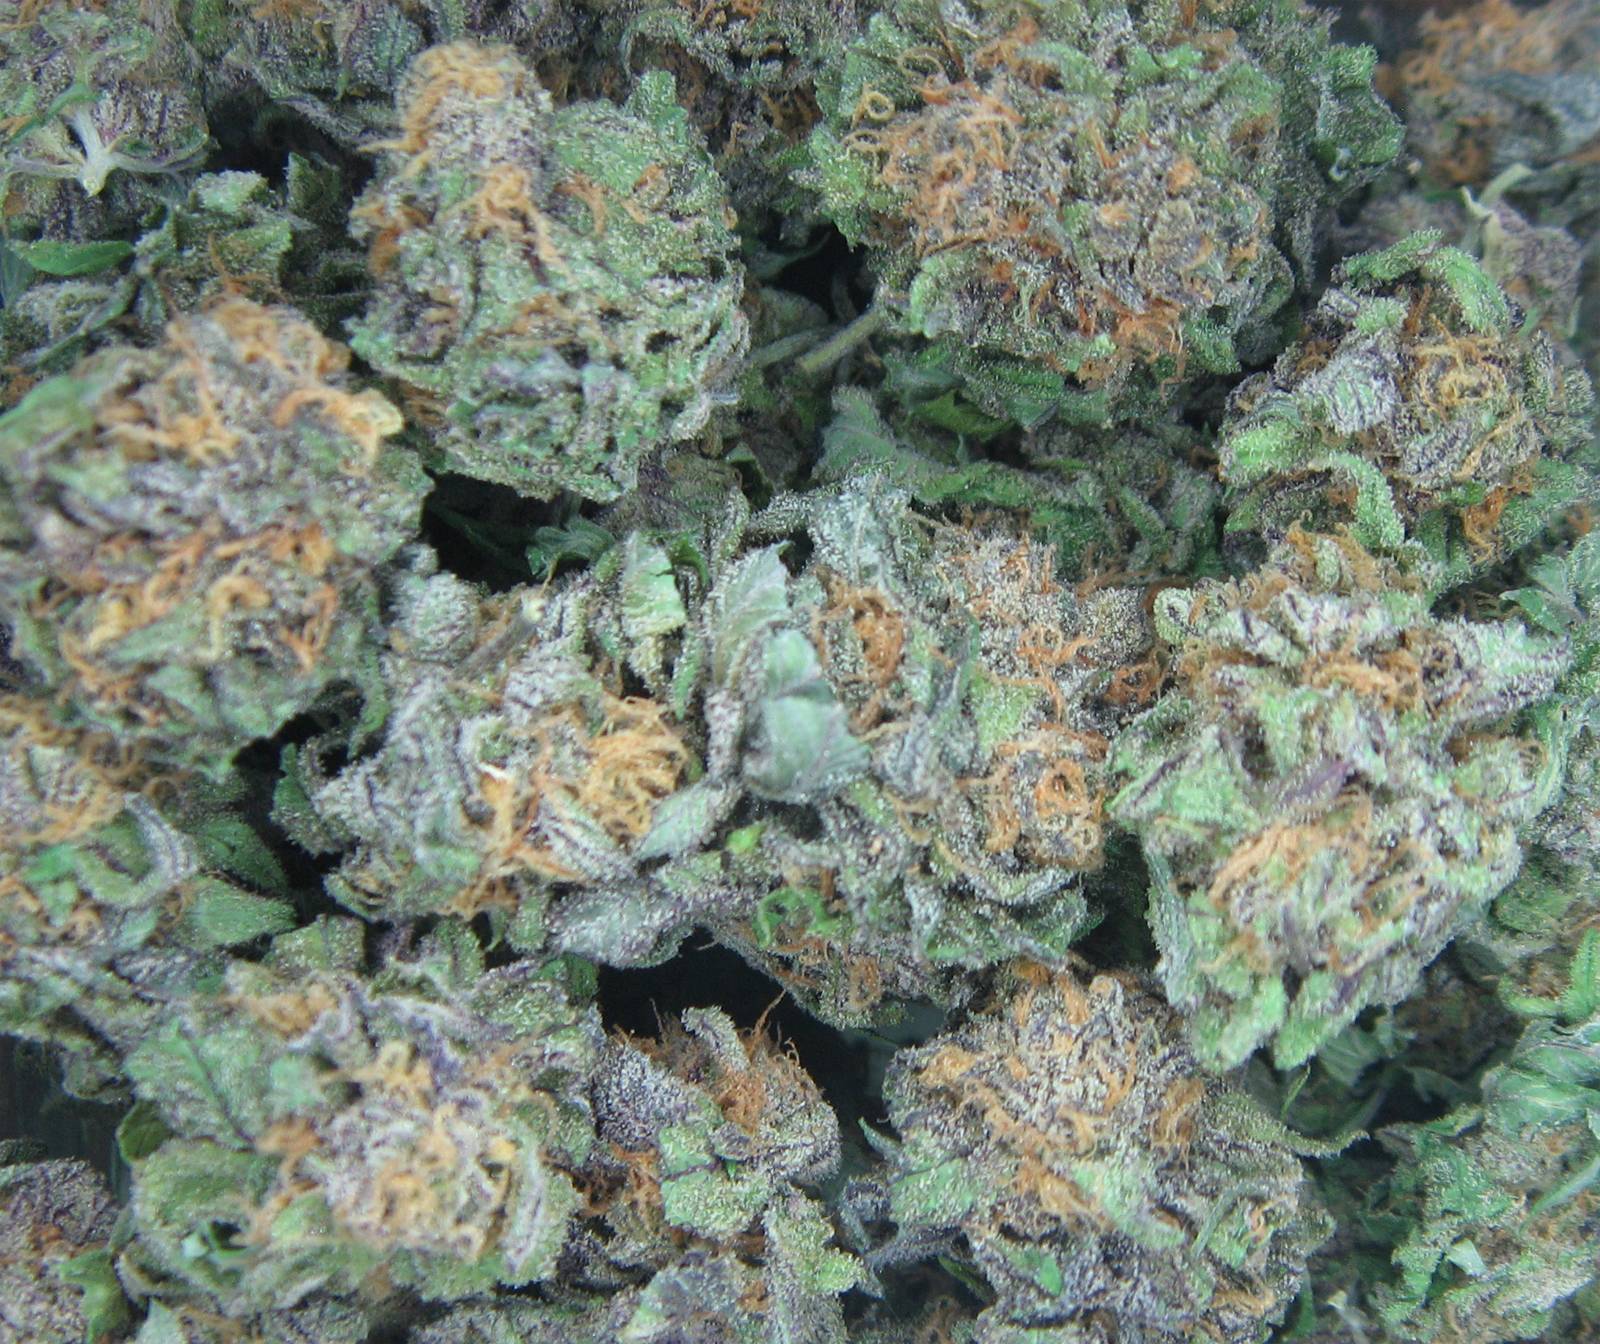 Blueberry Kush Pictures Wallpapers